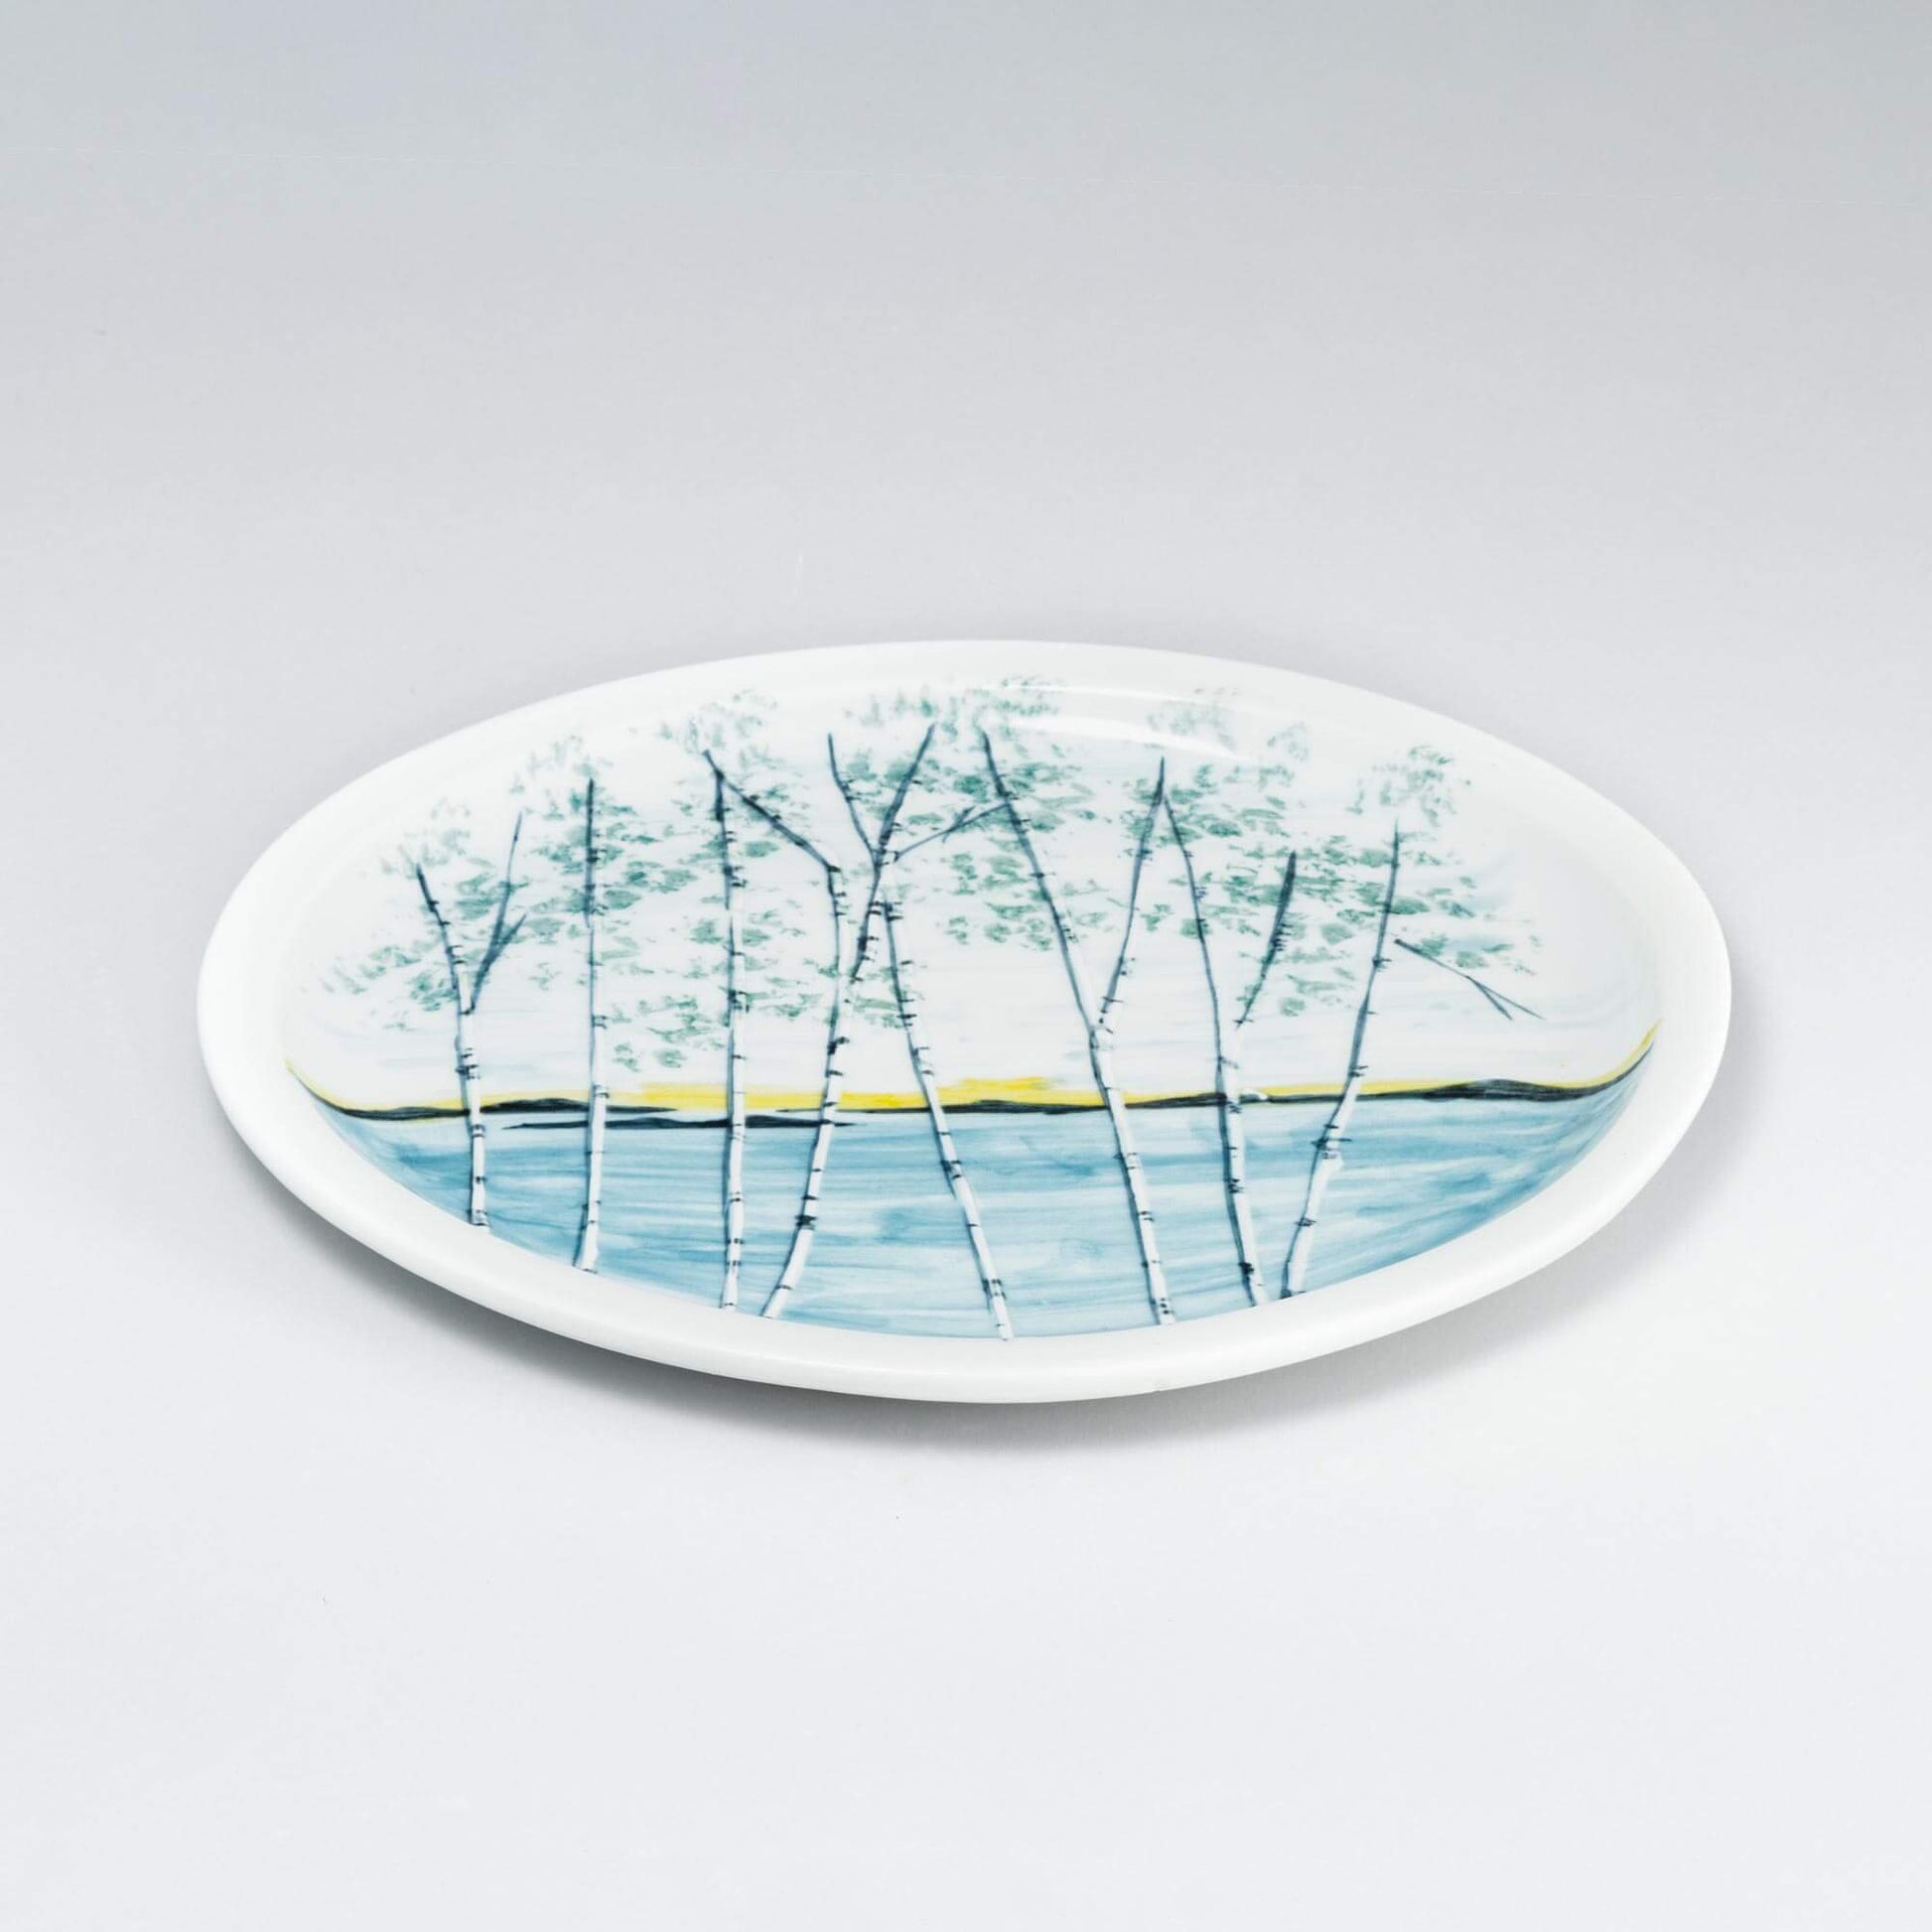 Handmade Pottery Oval Platter in Birch Point pattern made by Georgetown Pottery in Maine